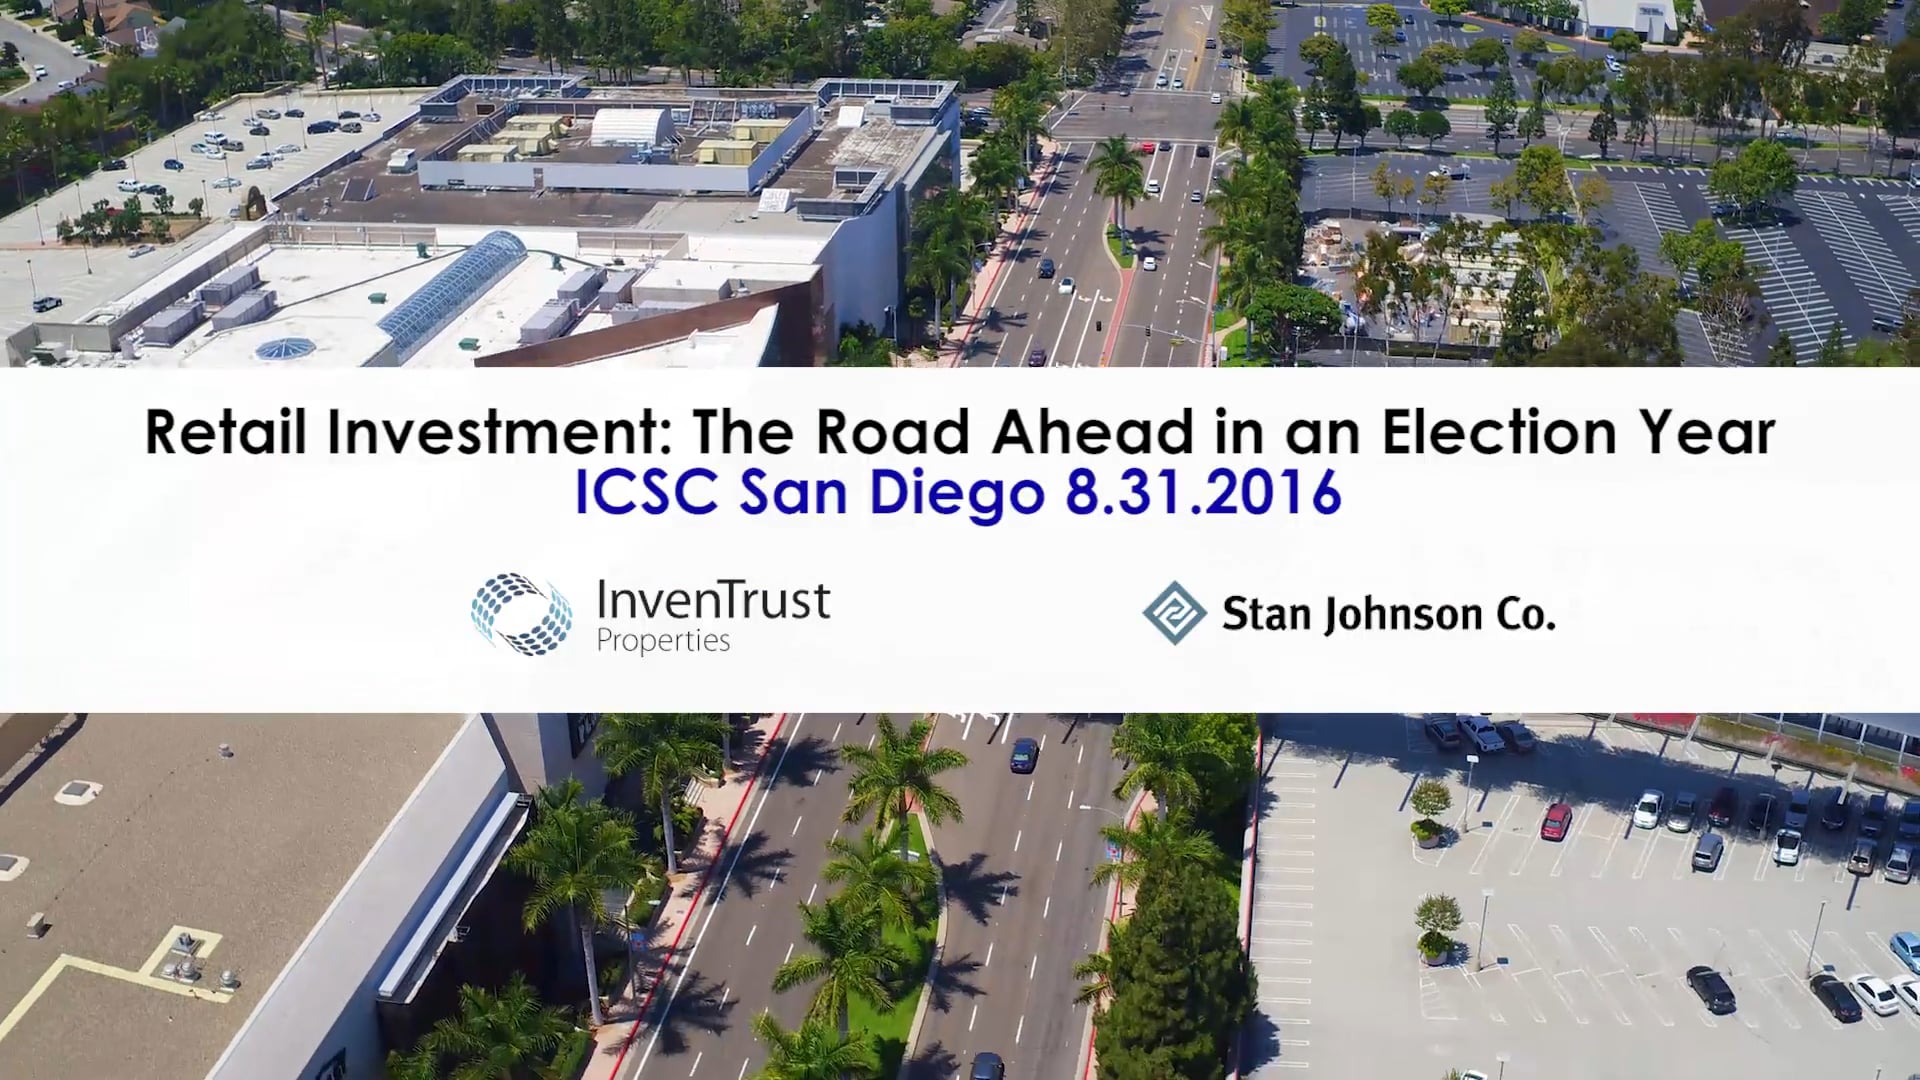 ICSC San Diego Retail Investment The Road Ahead in an Election Year